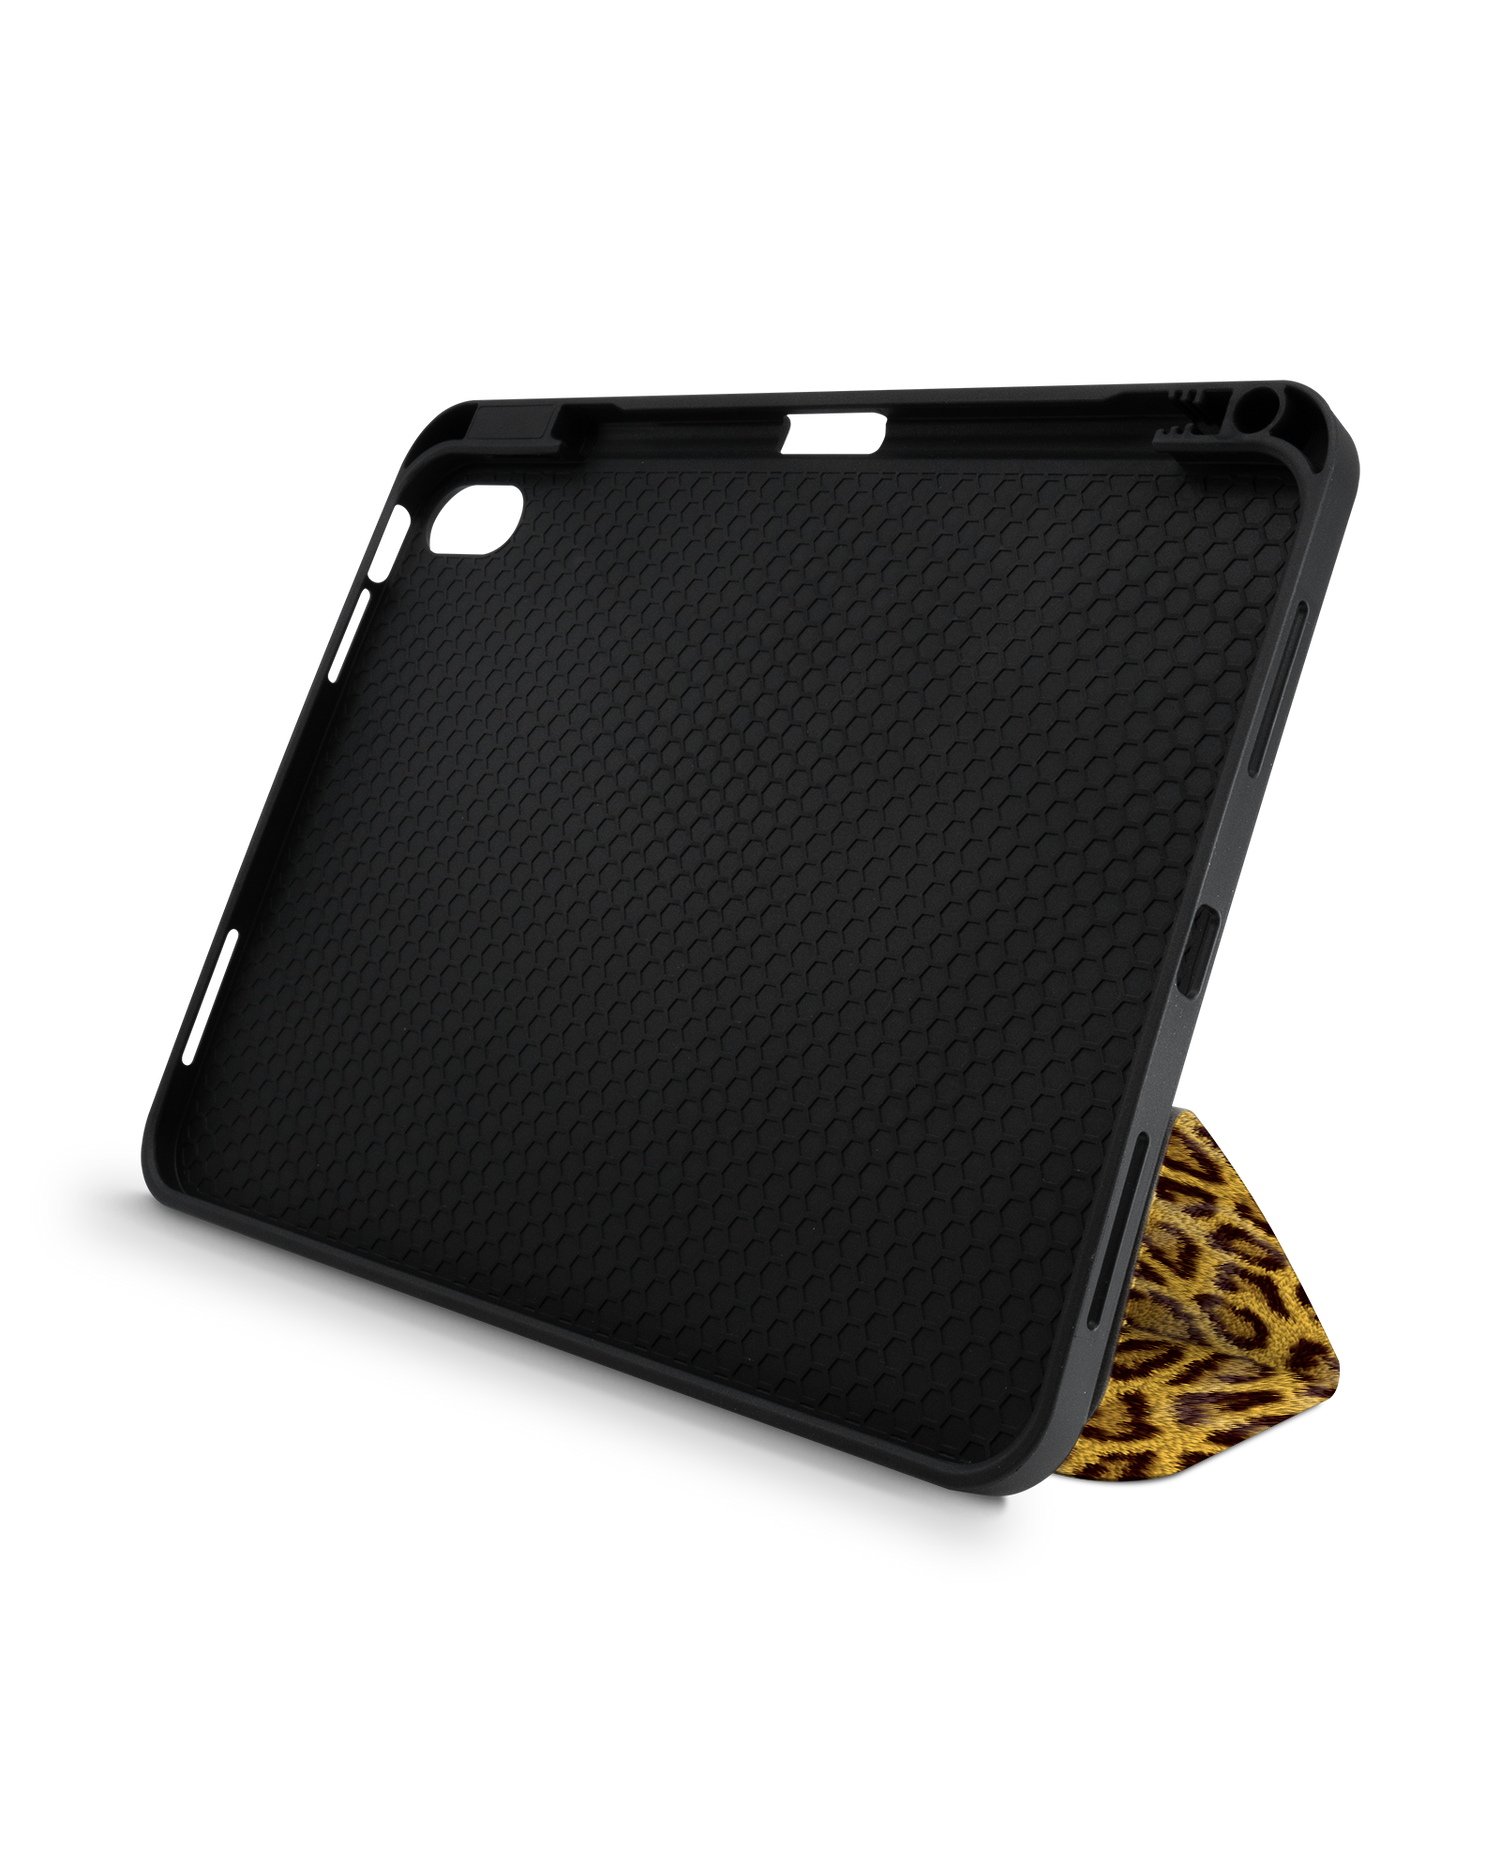 Leopard Skin iPad Case with Pencil Holder for Apple iPad (10th Generation): Set up in landscape format (front view)